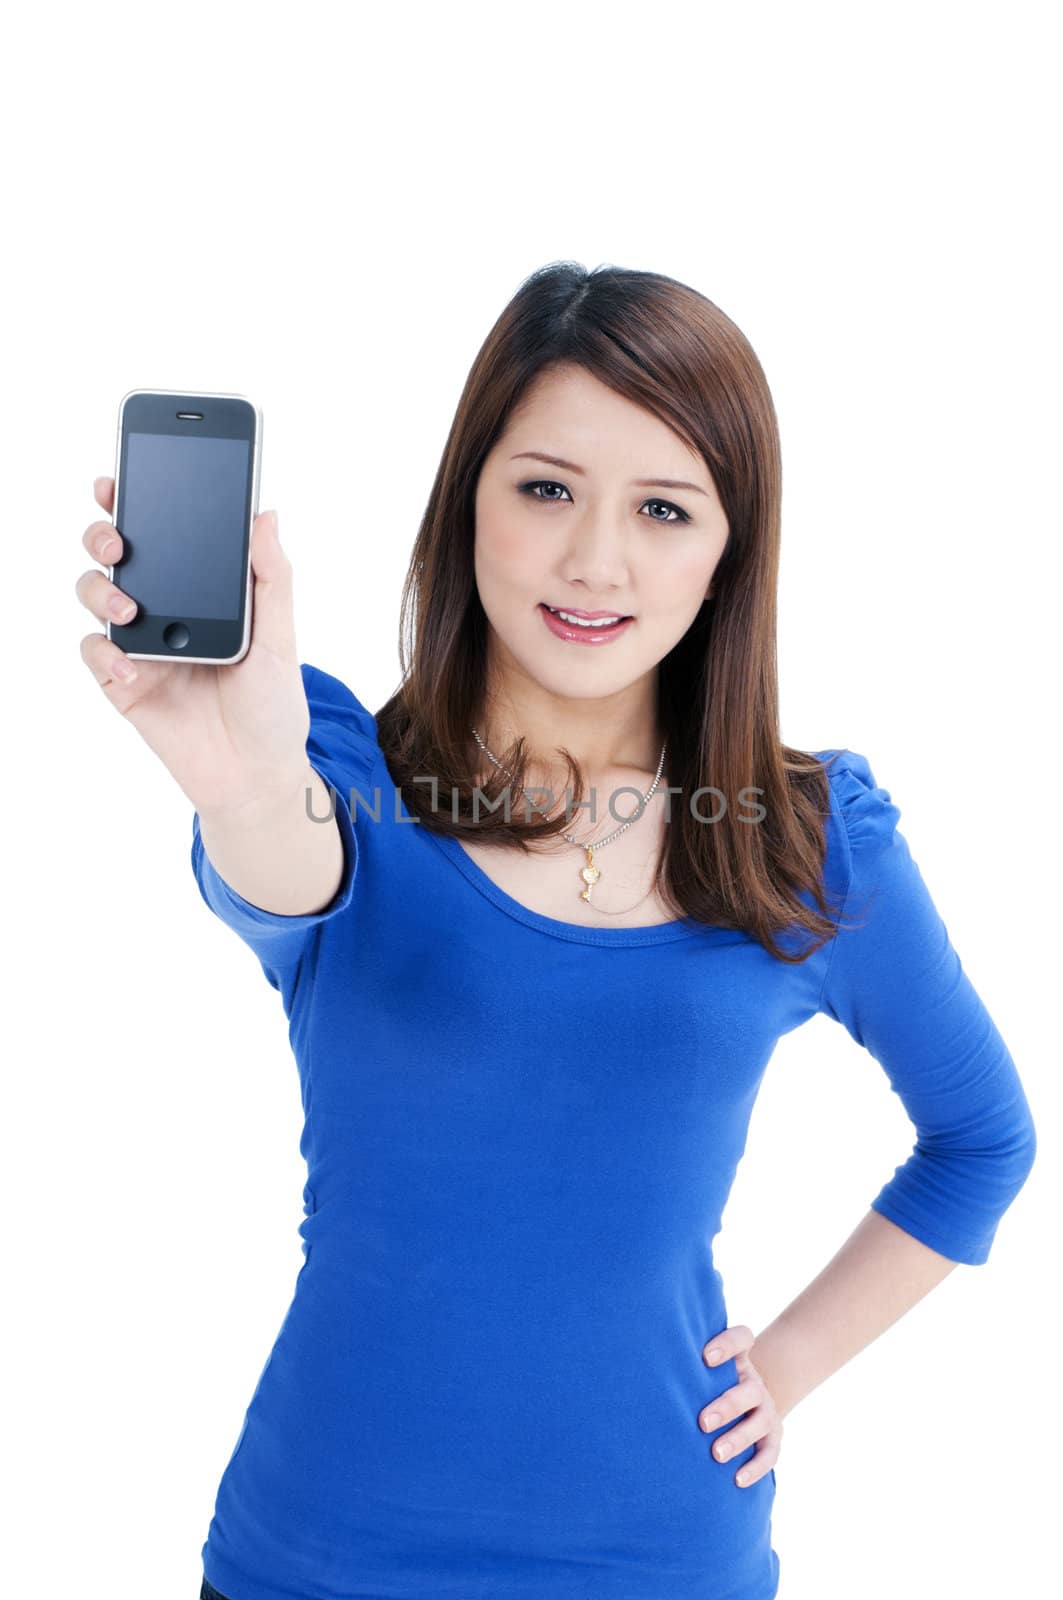 Portrait of a cute young woman holding a cellphone over white background.